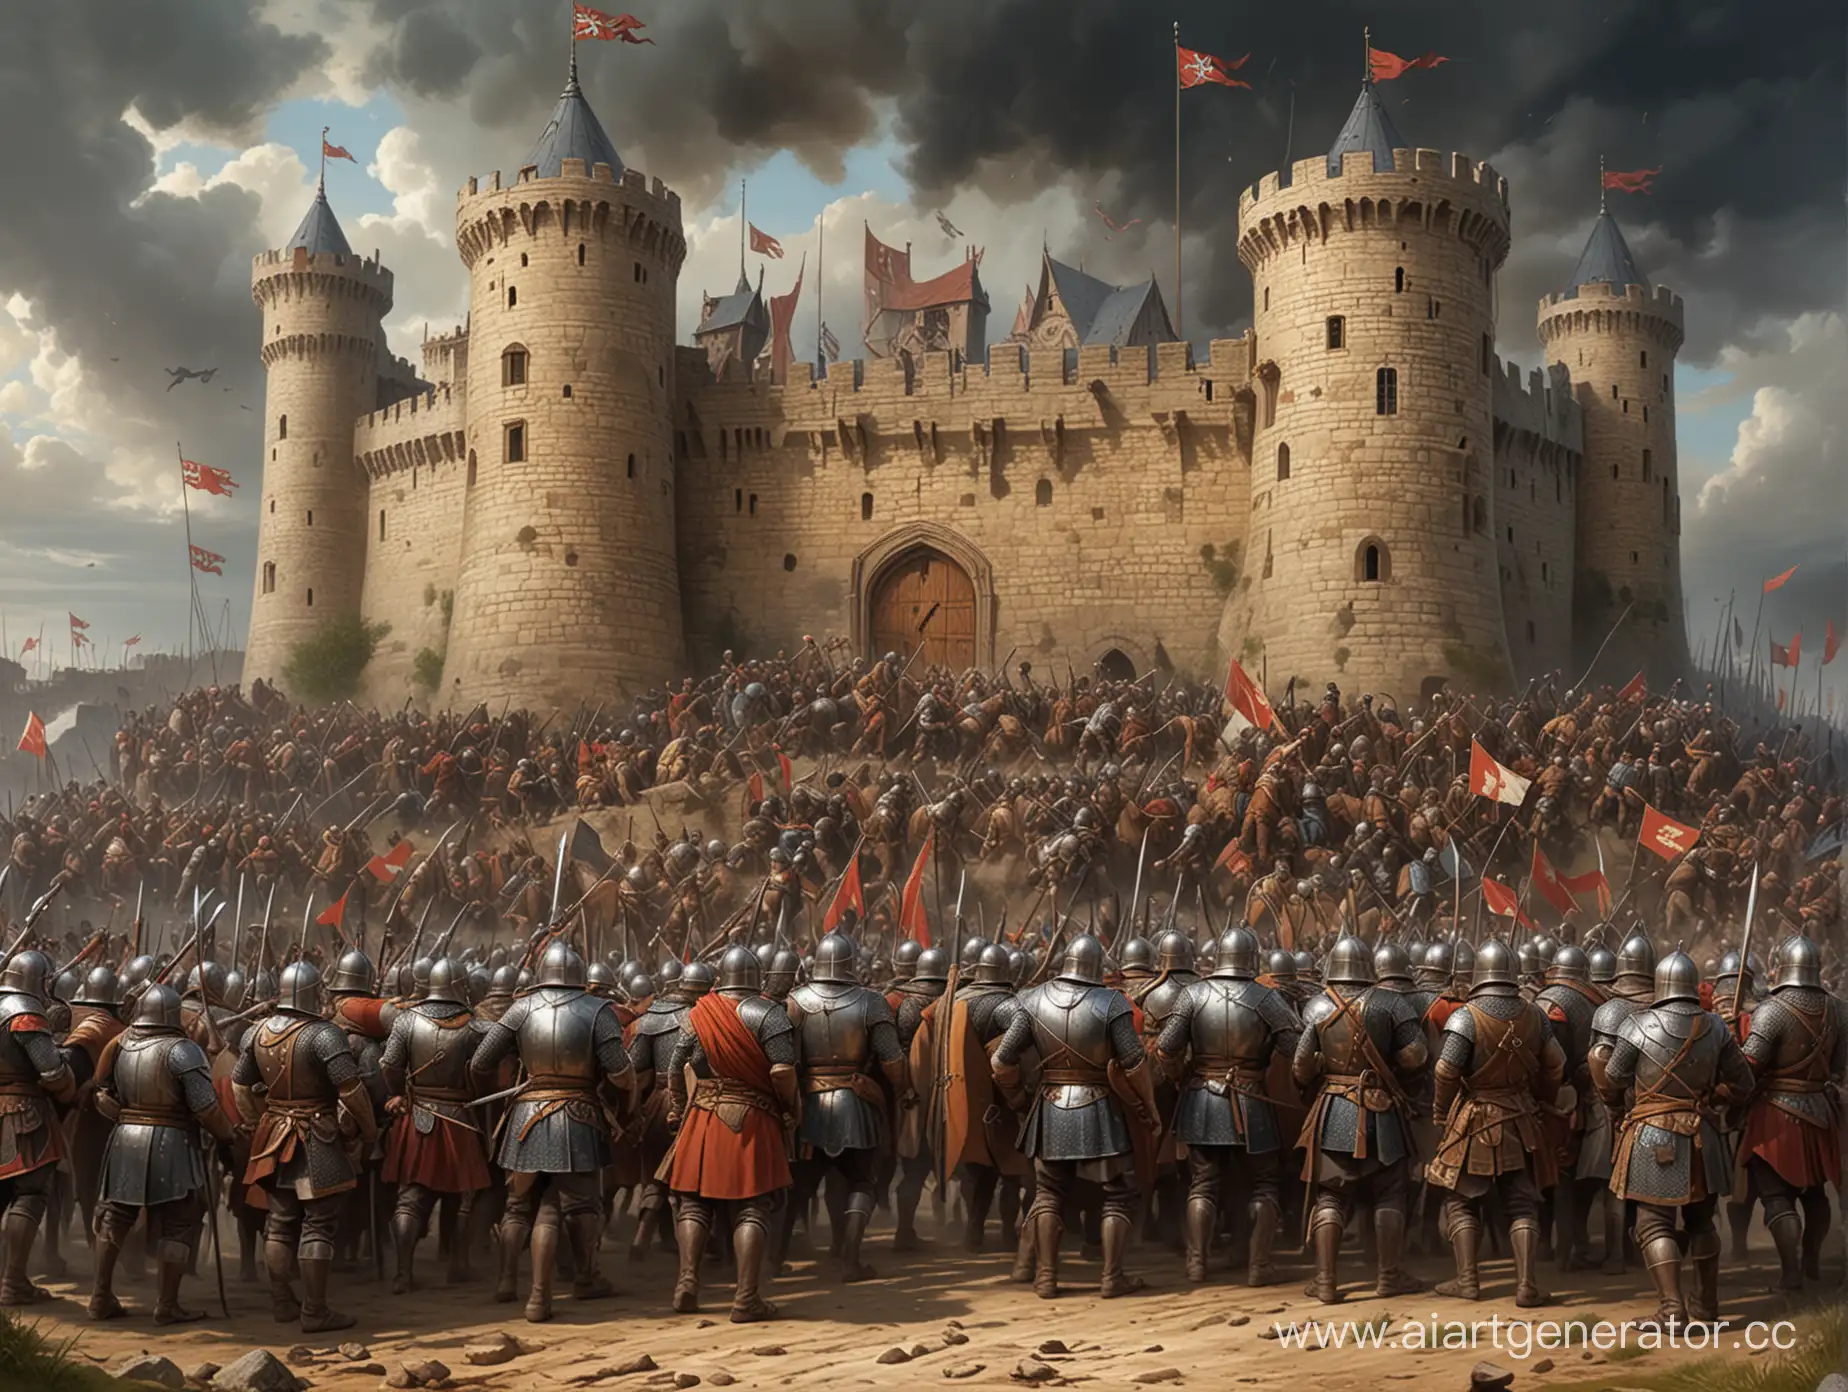 Medieval-Fortress-Siege-Led-by-Portly-Commander-and-Fighters